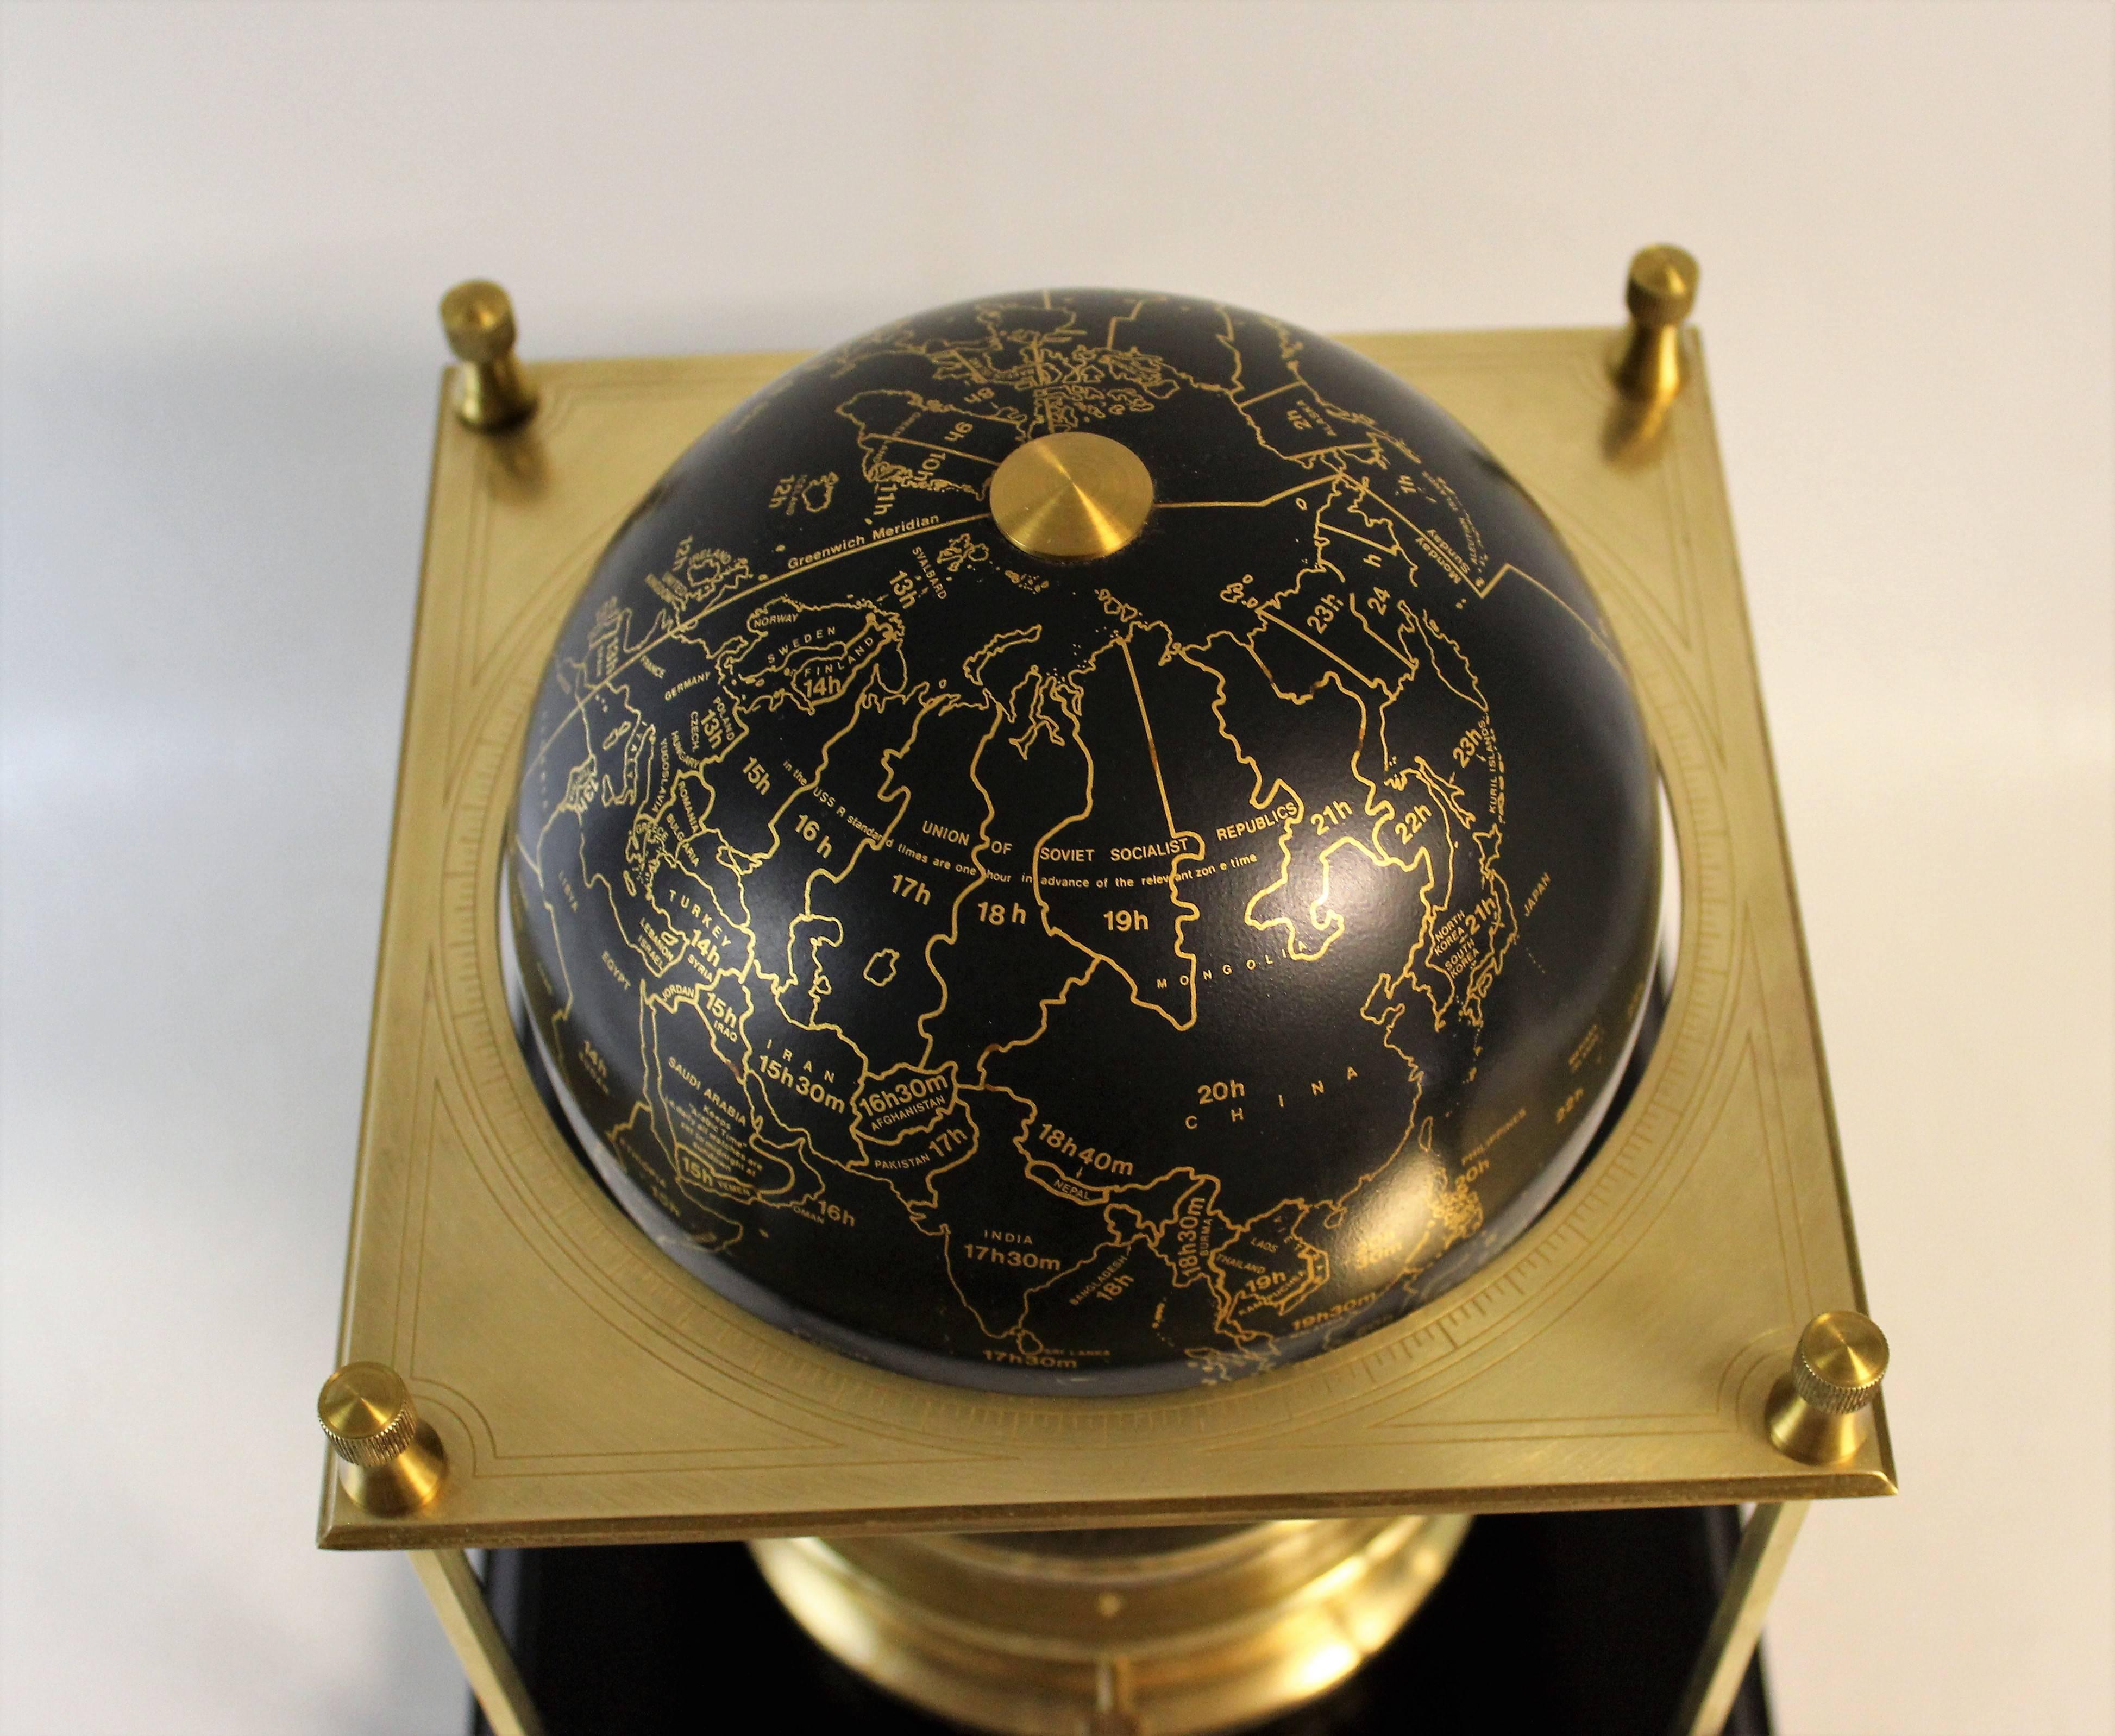 This Royal Geographical society world clock contains a 15 jewel movement by Arthur Imhof S.A. of La Chaux de Fonds Switzerland. The brass square frame with columns supports a terrestrial globe with time zones all marked in gilt on a black metallic